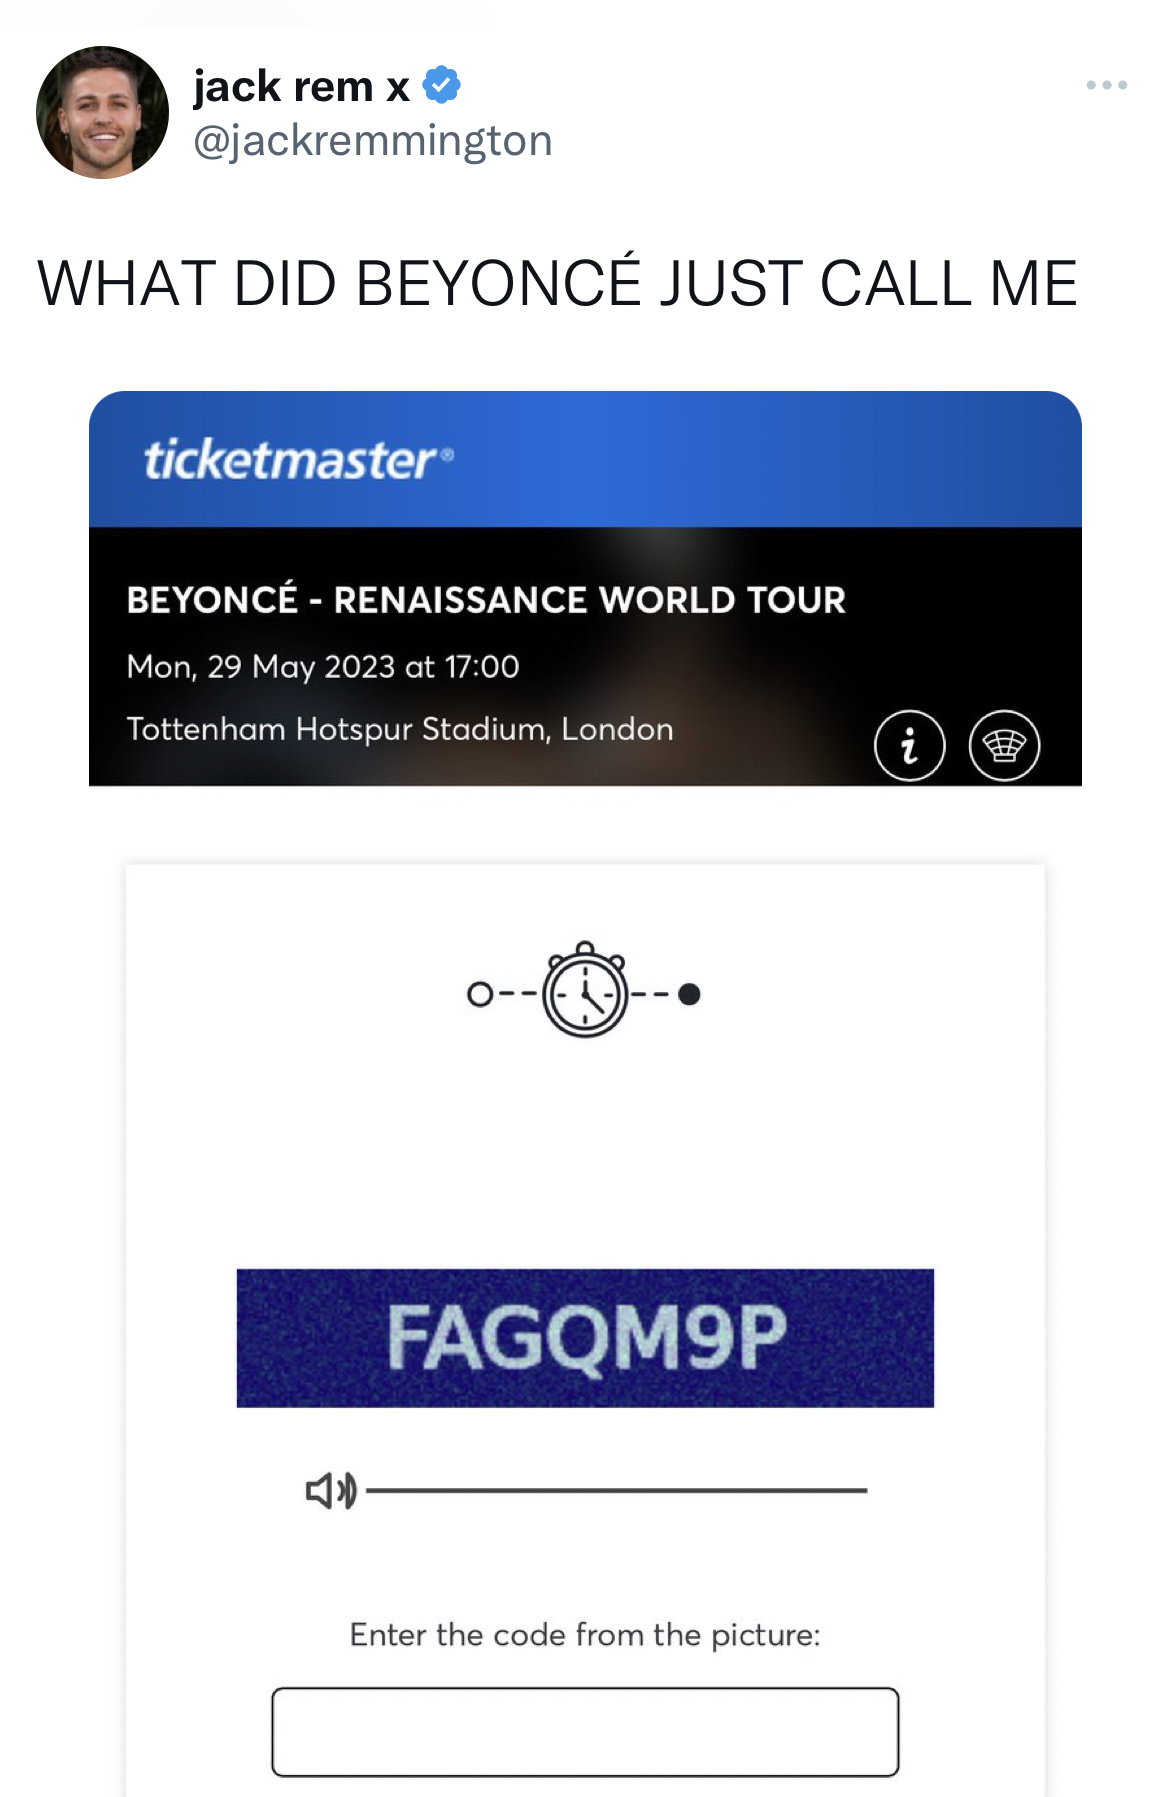 Untamed Tweets - web page - jack rem x What Did Beyonc Just Call Me ticketmaster Beyonc Renaissance World Tour Mon, at Tottenham Hotspur Stadium, London 10. FAGQM9P Enter the code from the picture